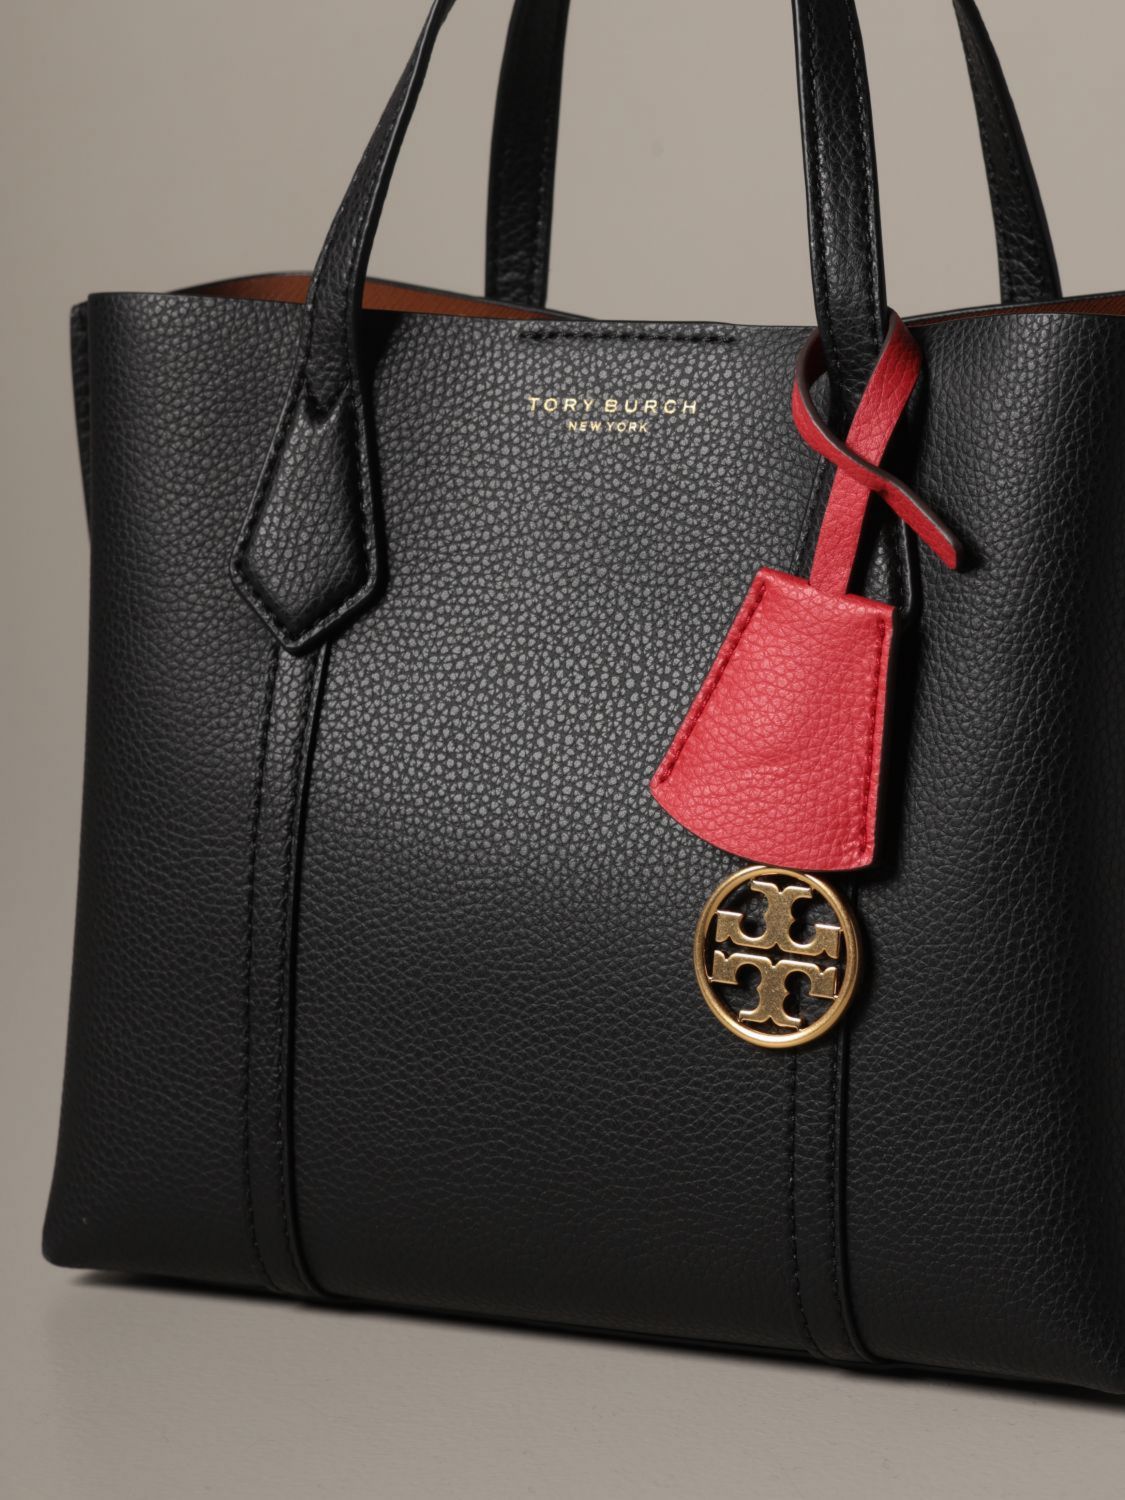 Ebay Tory Burch Tote Online Factory, Save 46% 